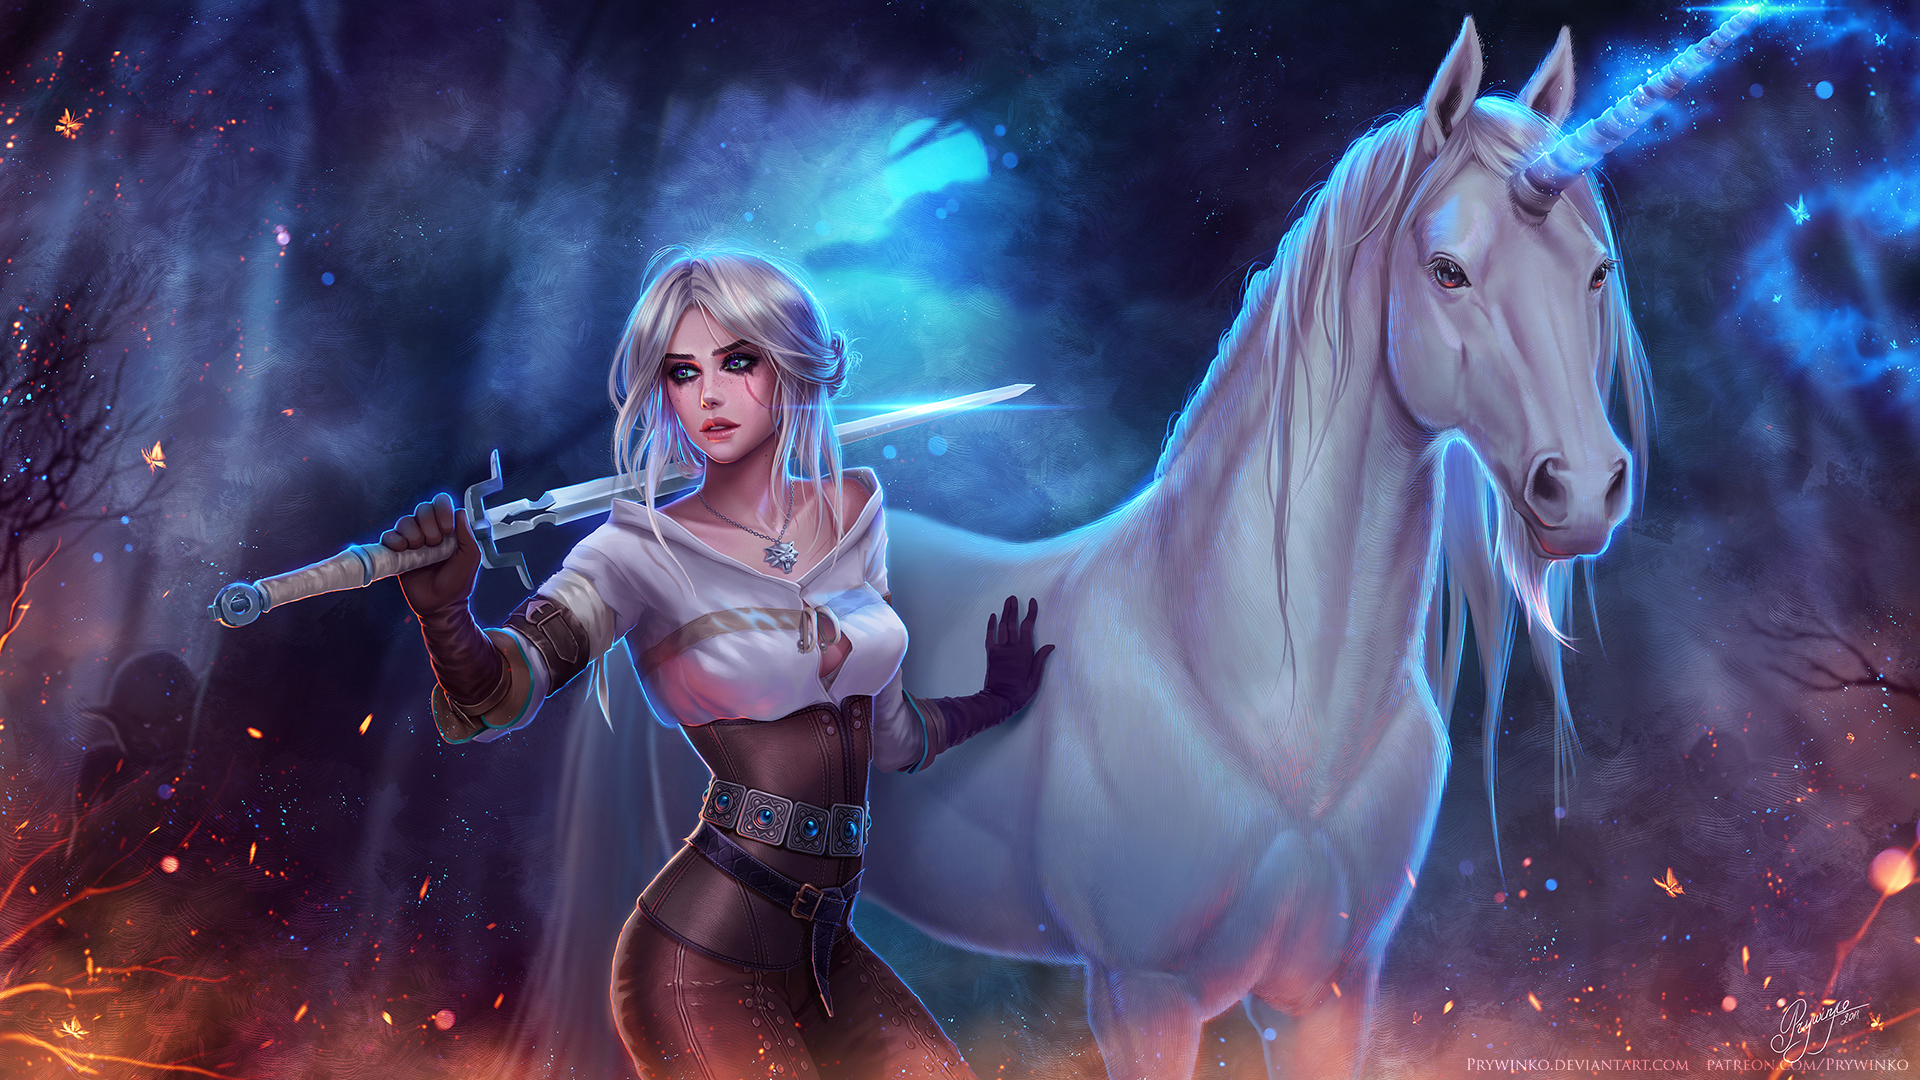 General 1920x1080 Cirilla Fiona Elen Riannon The Witcher video games fan art video game art video game characters video game girls white hair cleavage sword weapon looking at viewer scars necklace unicorn fantasy art forest night sparks fire artwork drawing digital art Prywinko glowing